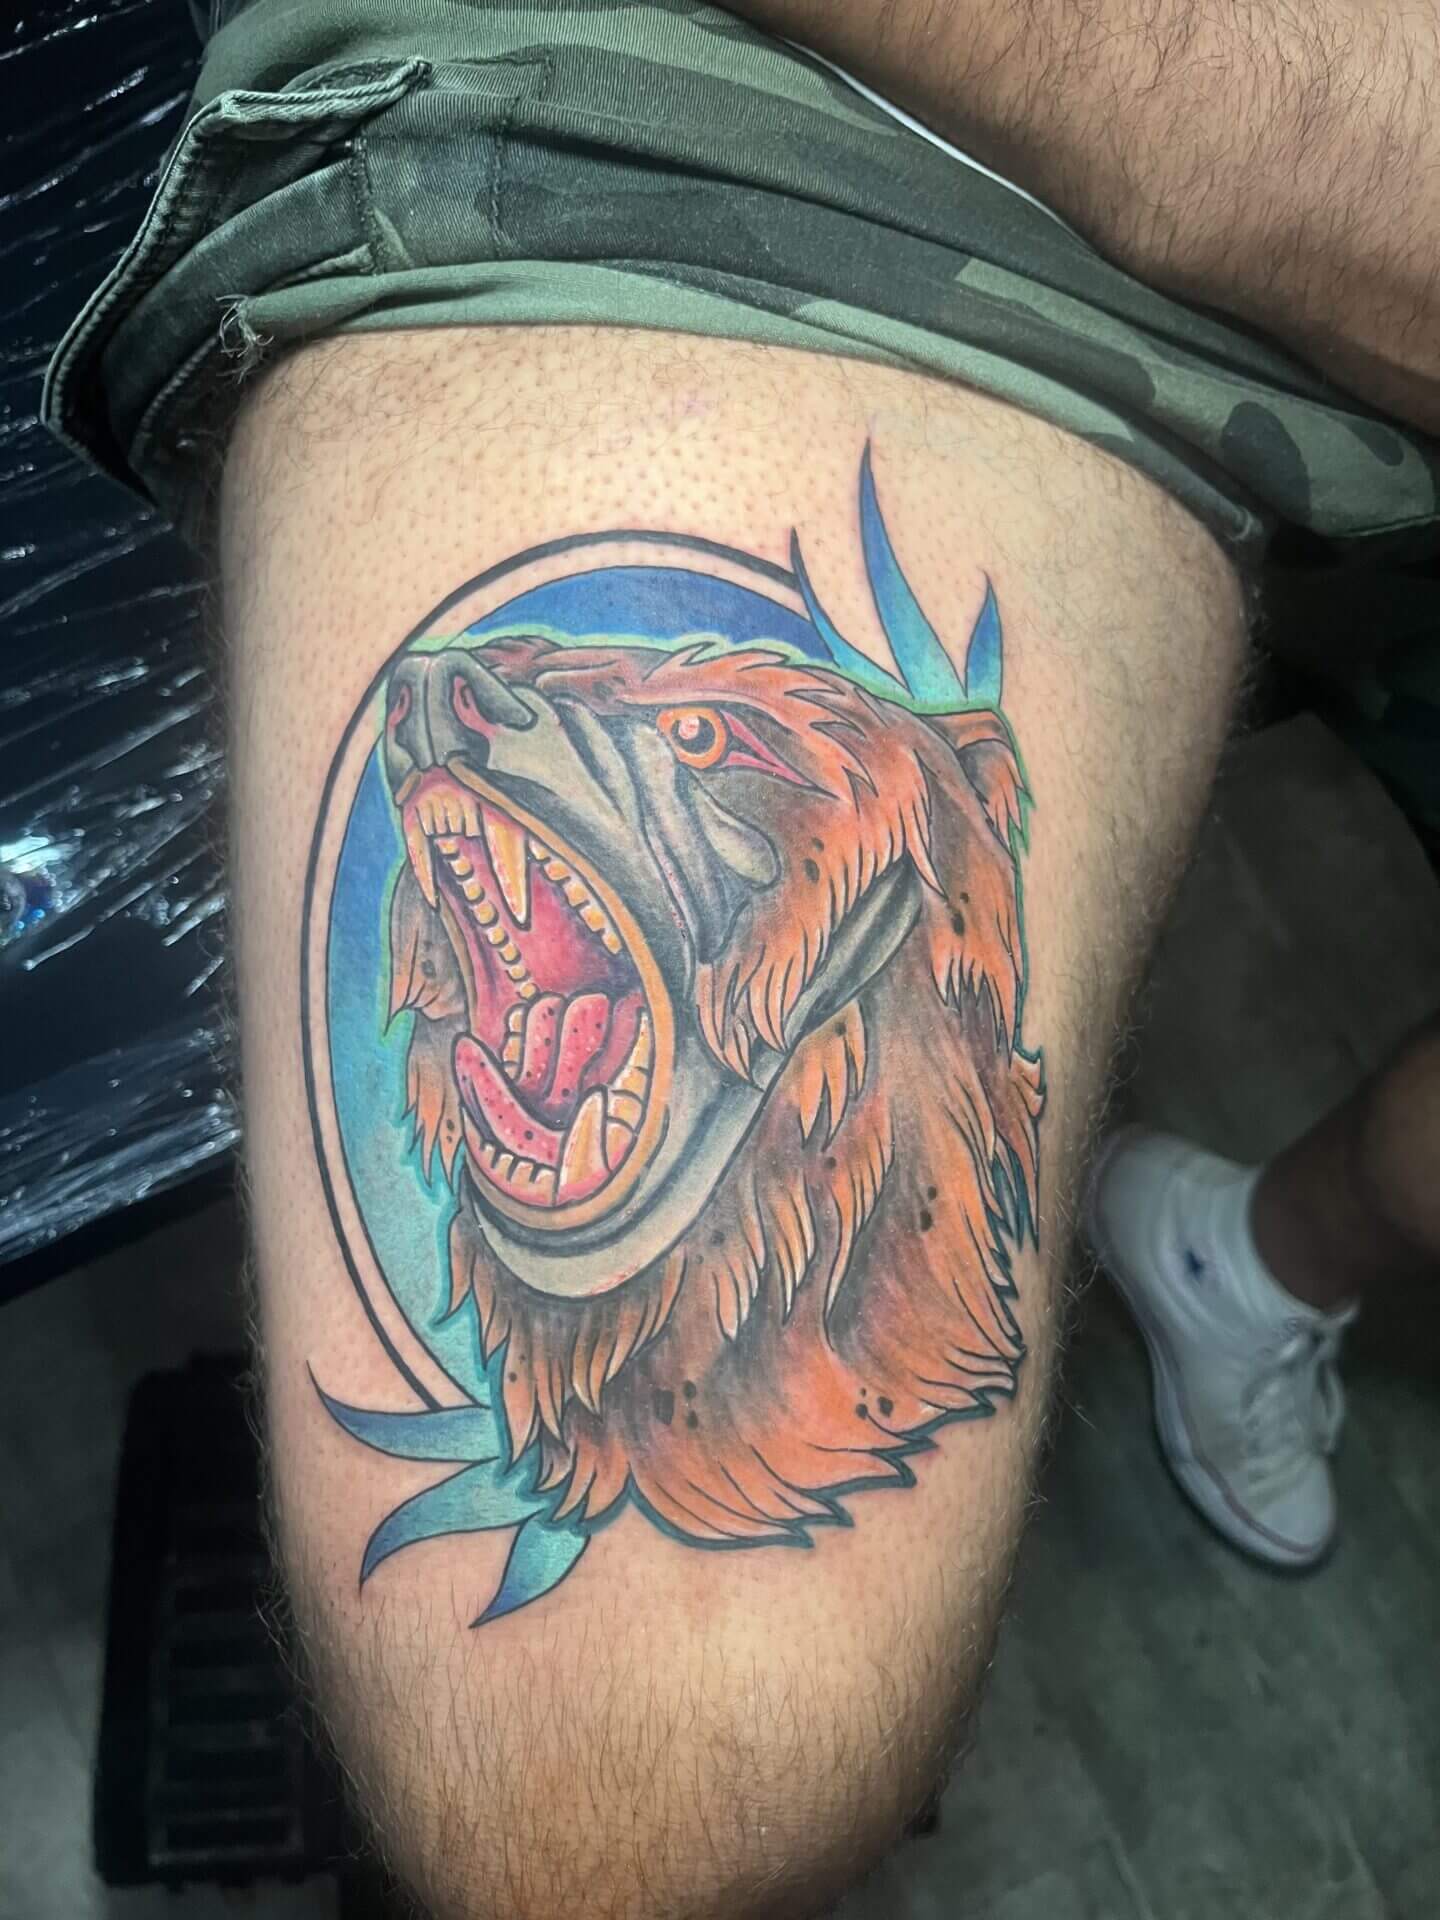 Color Kodiak bear tattoo by artist Paper Airplane Jane in downtown Atlanta at Iron Palm Tattoos. Call 404-973-7828 or stop by for a free consultation to book Jane.